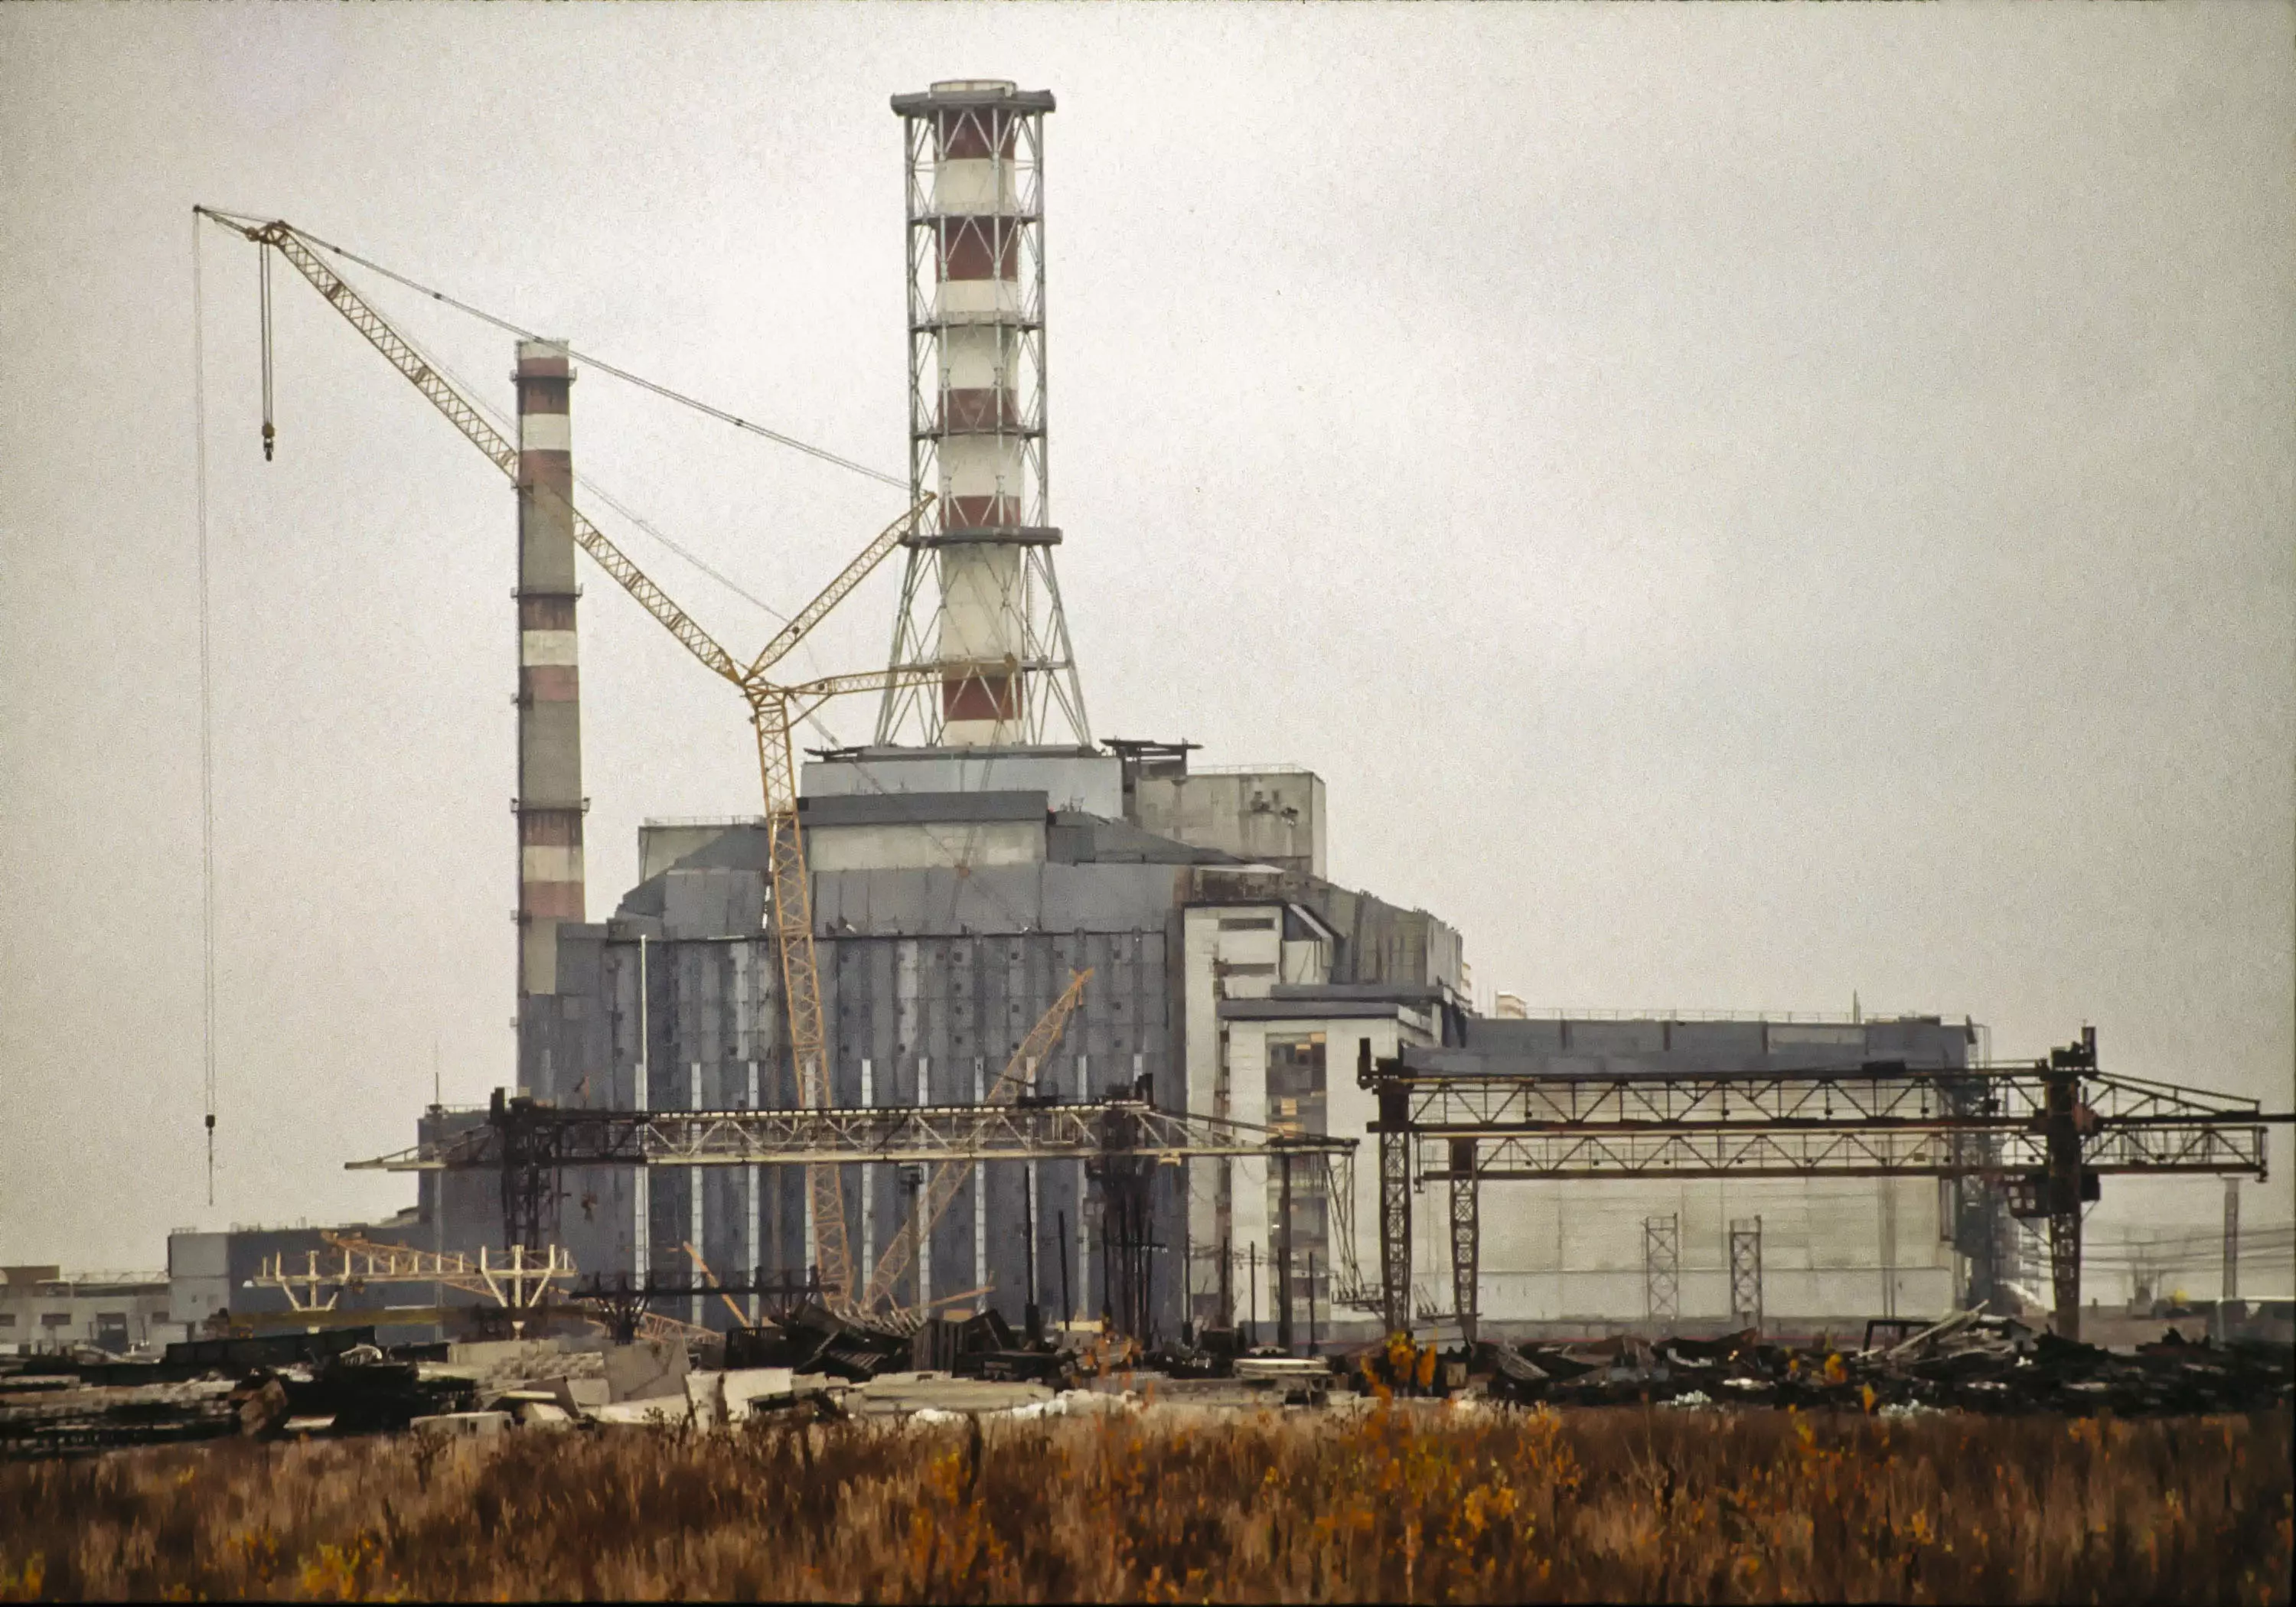 Reactor No. 4 of the Chernobyl power plant.